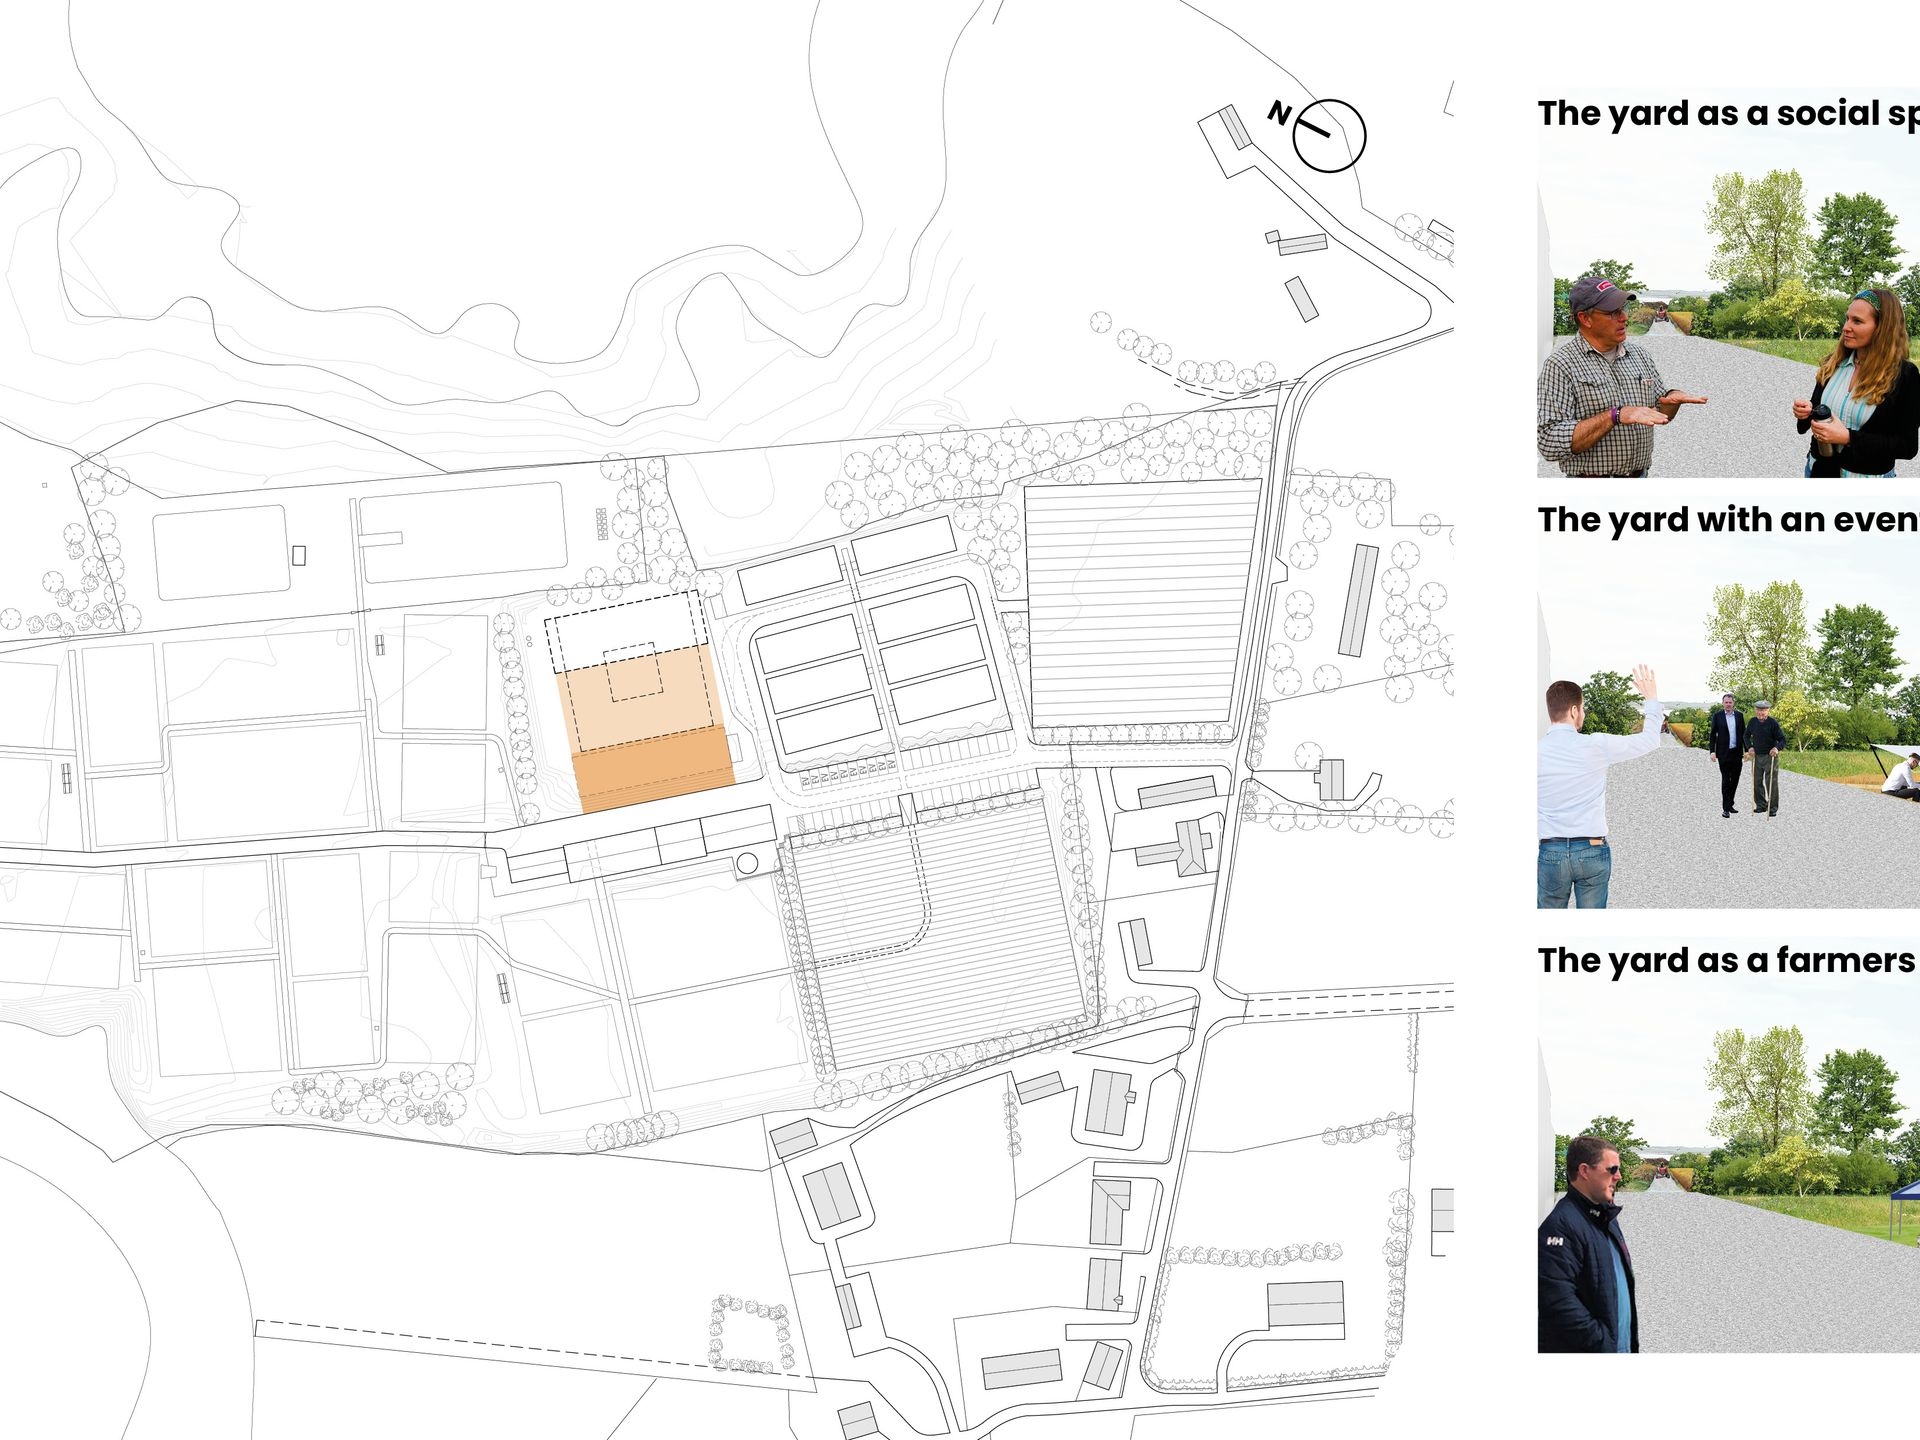 This is the space between the sheds and the hub. This area acts as a plaza within the site being a place for social congregation. In the instance that the hub is two stories high, this area will have increased capacity and can act as a multi-functional space where events can happen.